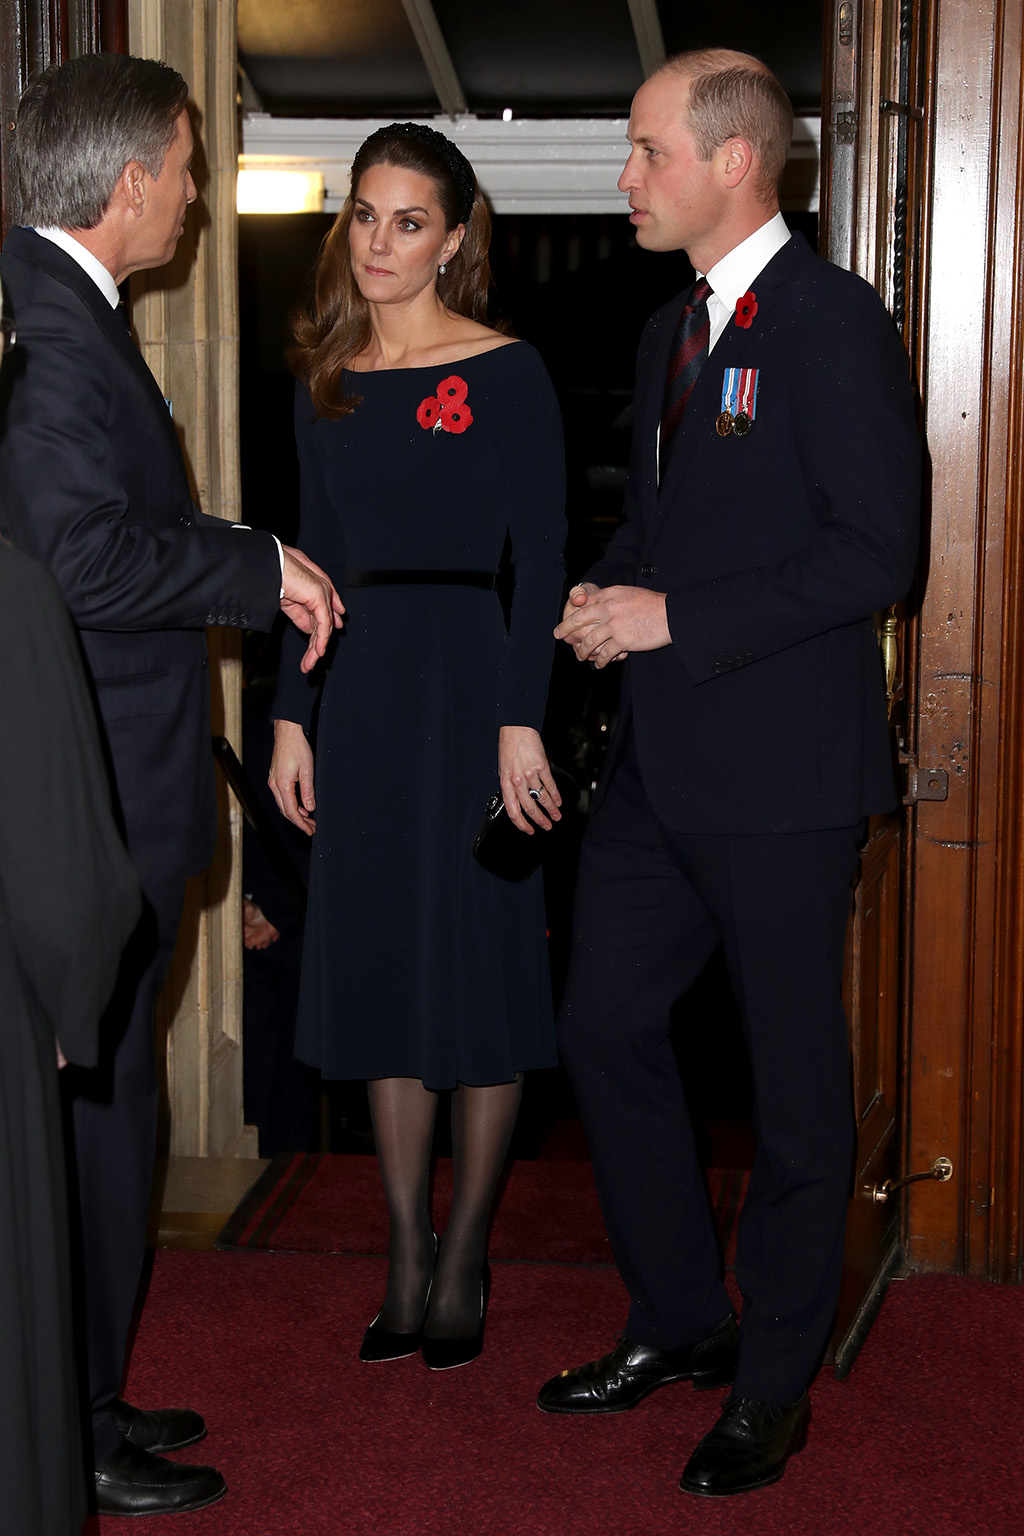 catherine-duchess-of-cambridge-in-navy-dress-2019-royal-british-legion-festival-of-remembrance-in-london